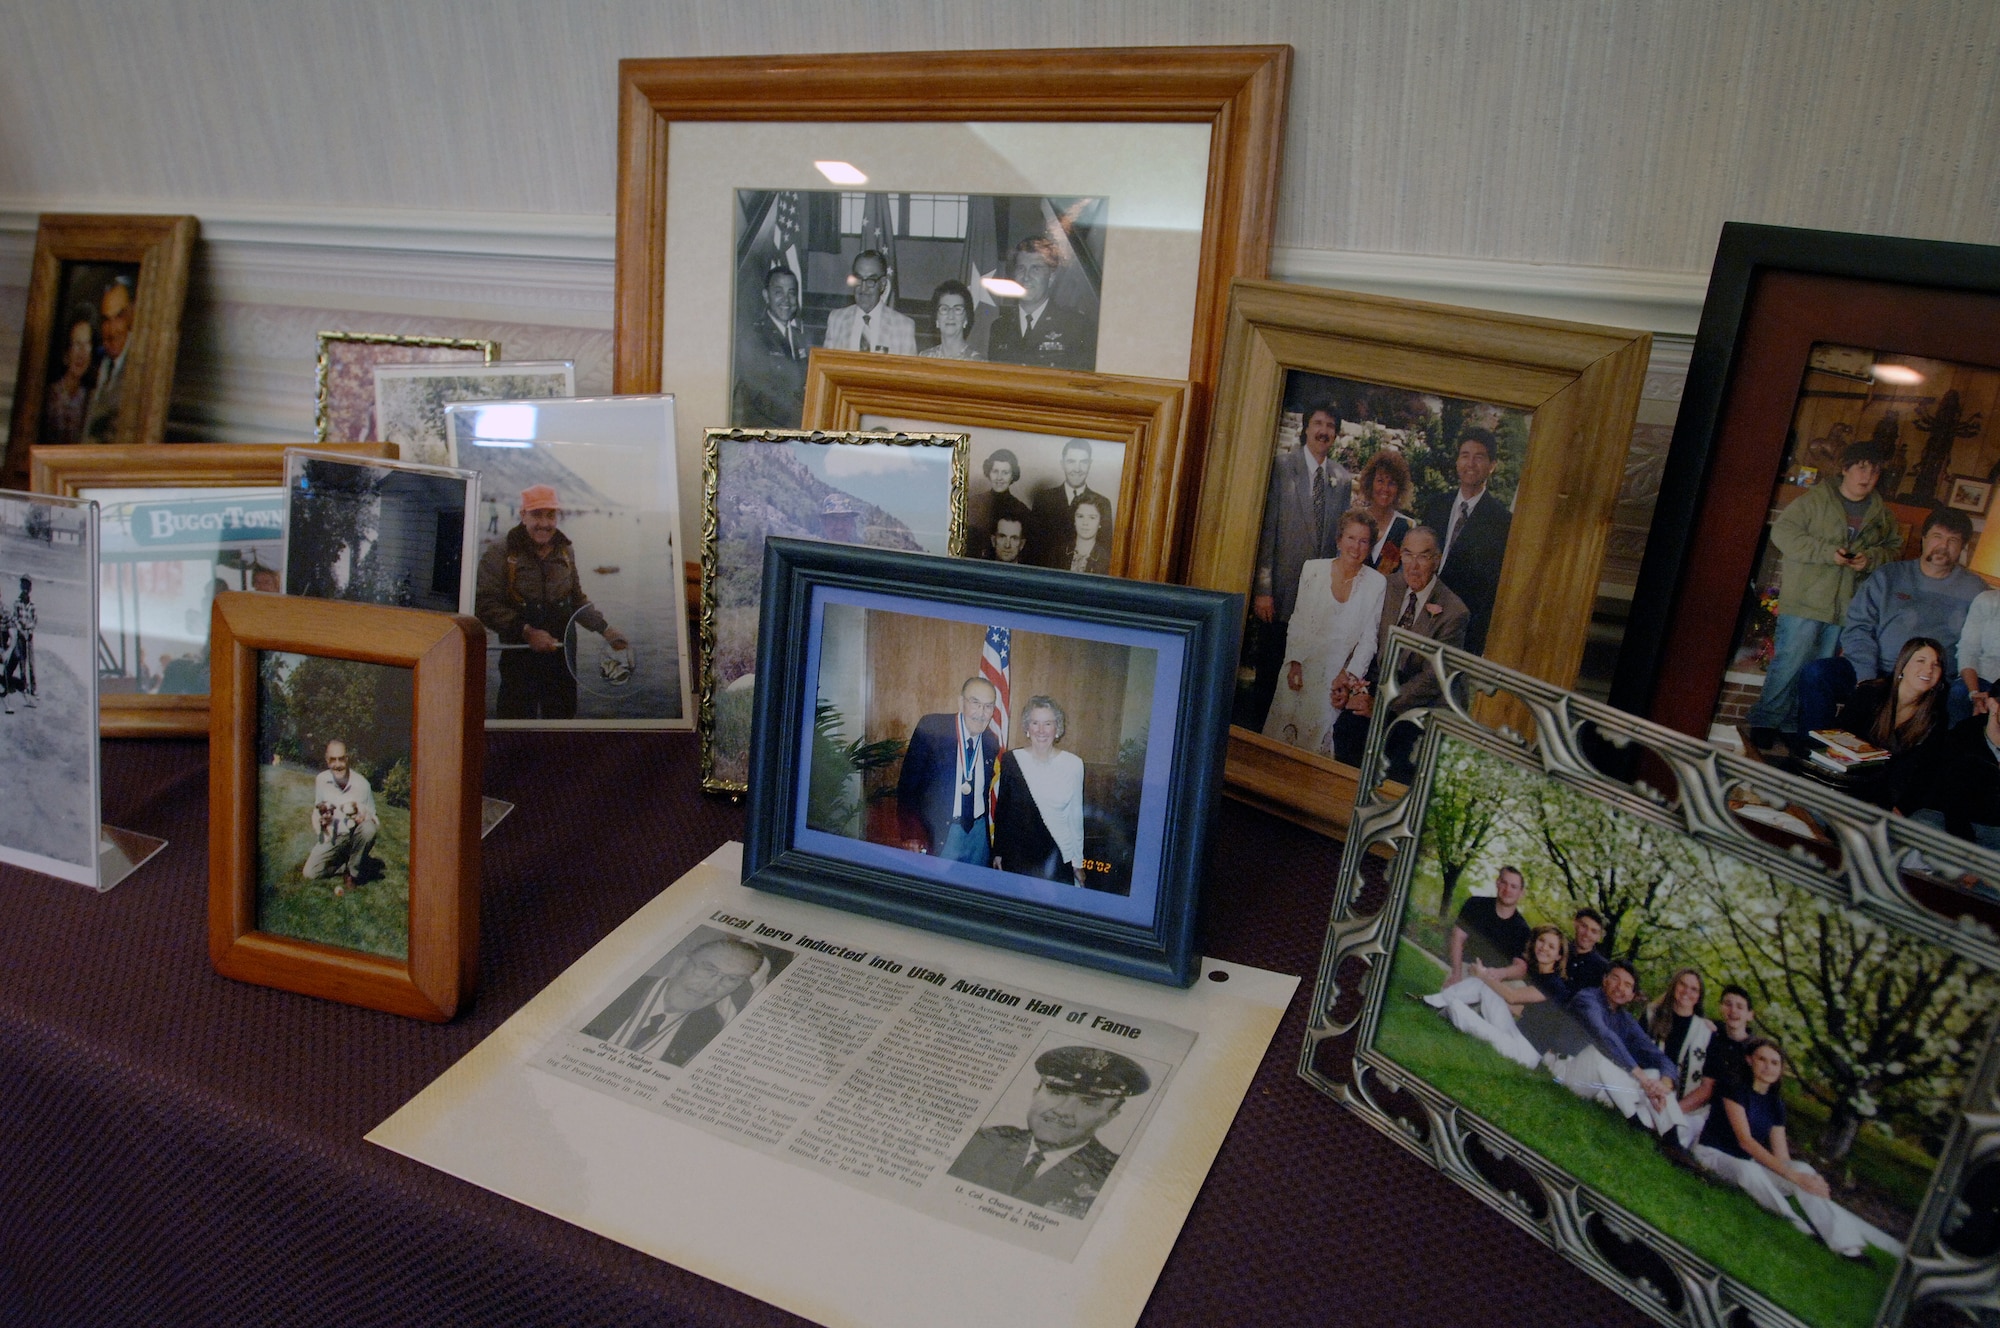 Family photos and other memorabilia adorn the chapel of the Allen-Hall Mortuary where family and friends attended Lt. Colonel Chase J. Nielsen memorial service in Hyrum, Utah March 28. Colonel Nielsen was one of the few remaining members of the famed Doolittle Raiders. The members of the Doolittle Raiders reached national acclaim in 1942 after launching the first successful aerial bombing raid on Tokyo, Japan as retaliation for the Japanese bombing of Pearl Harbor, Hawaii in December of 1941. (U.S. Air Force photo/Efrain Gonzalez)